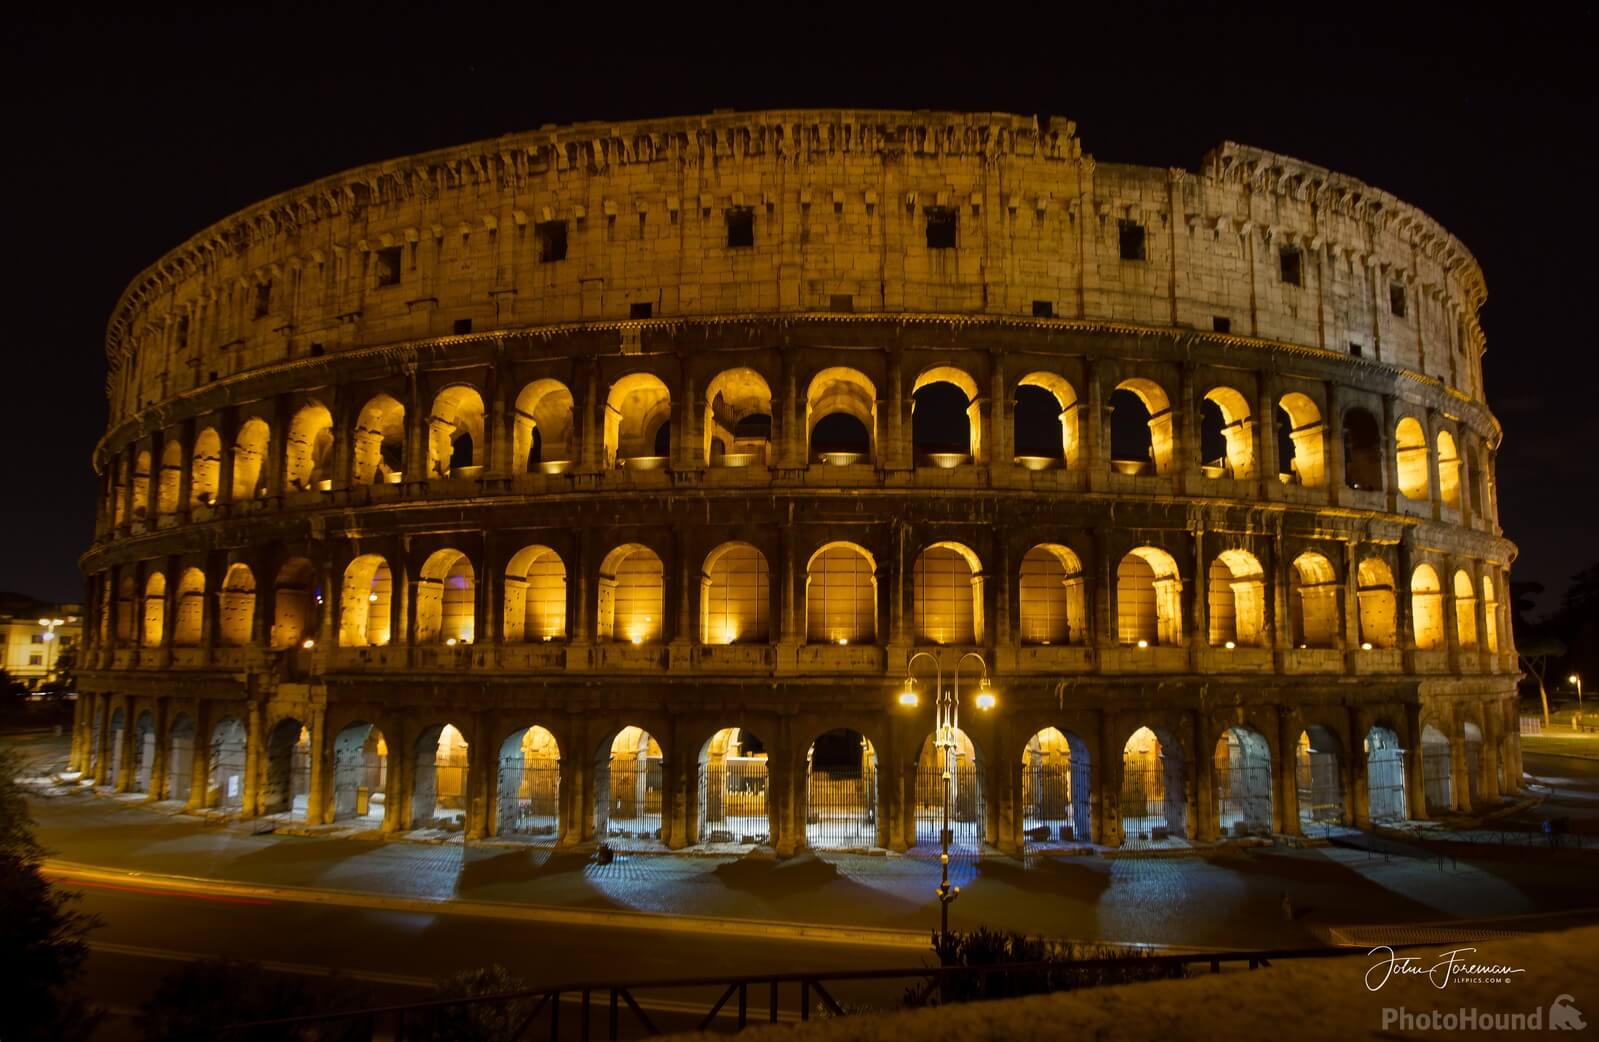 Image of Colosseum  by John Foreman